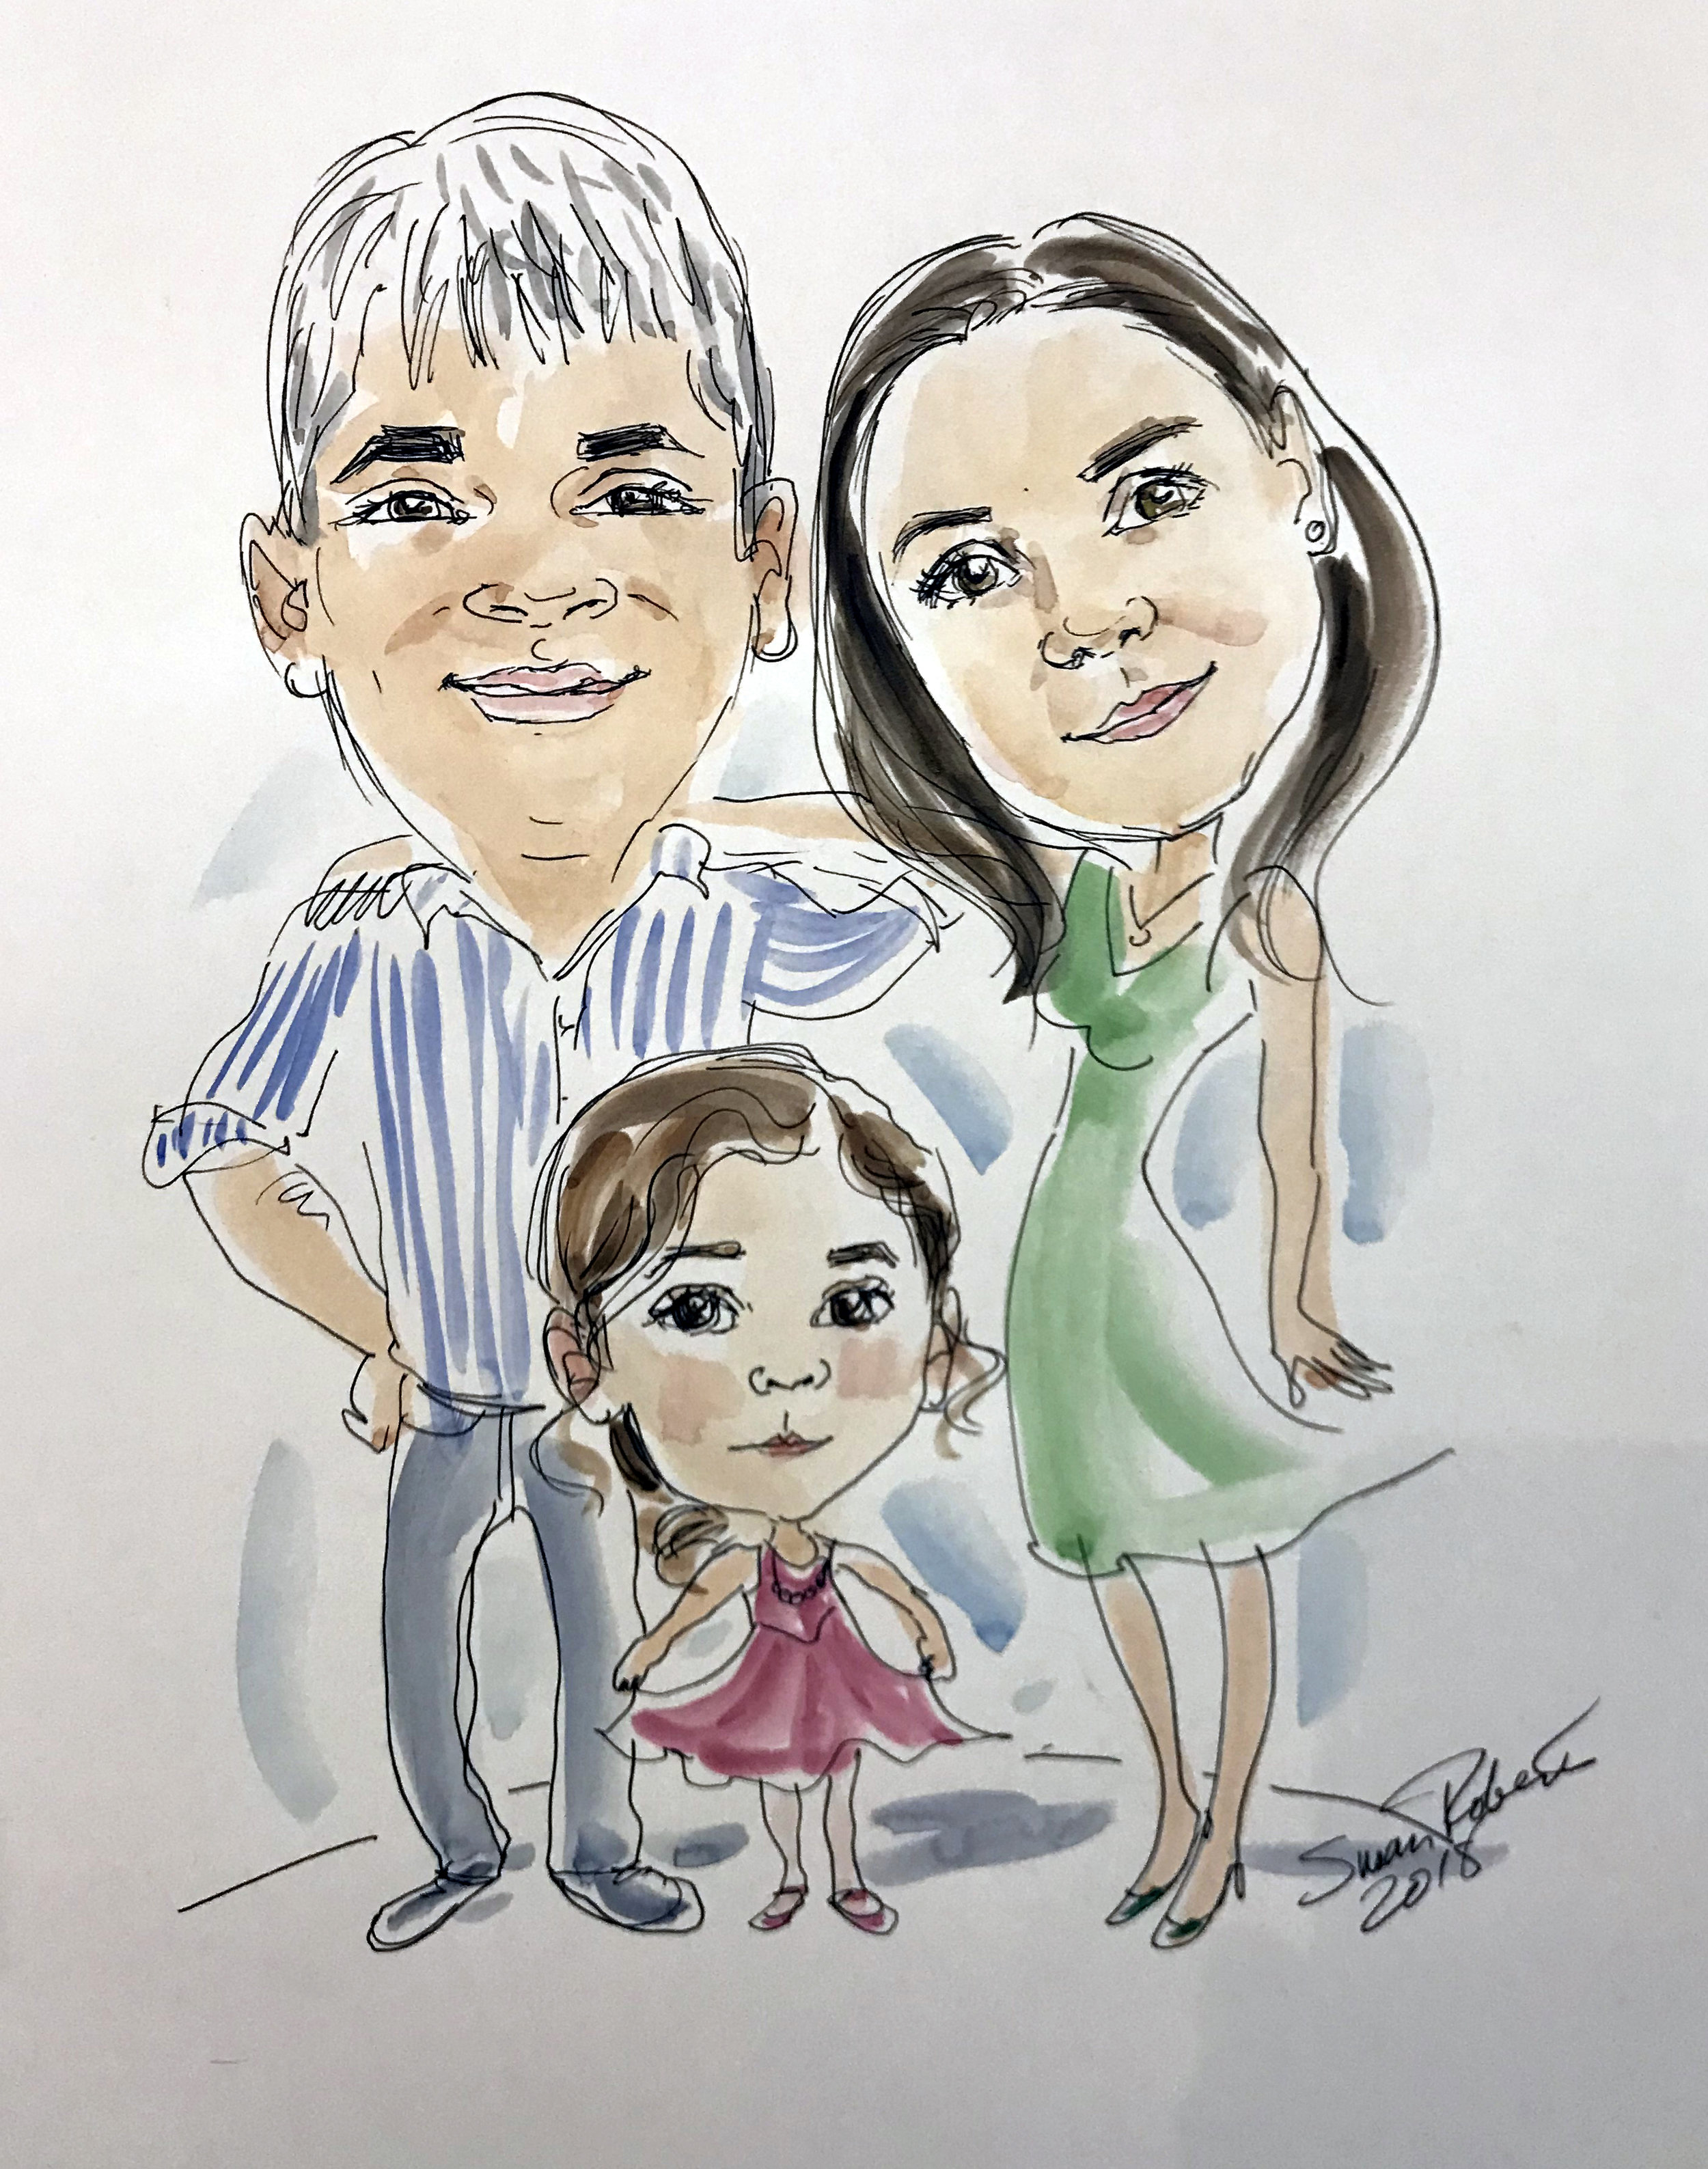 Group caricature with watercolor wash